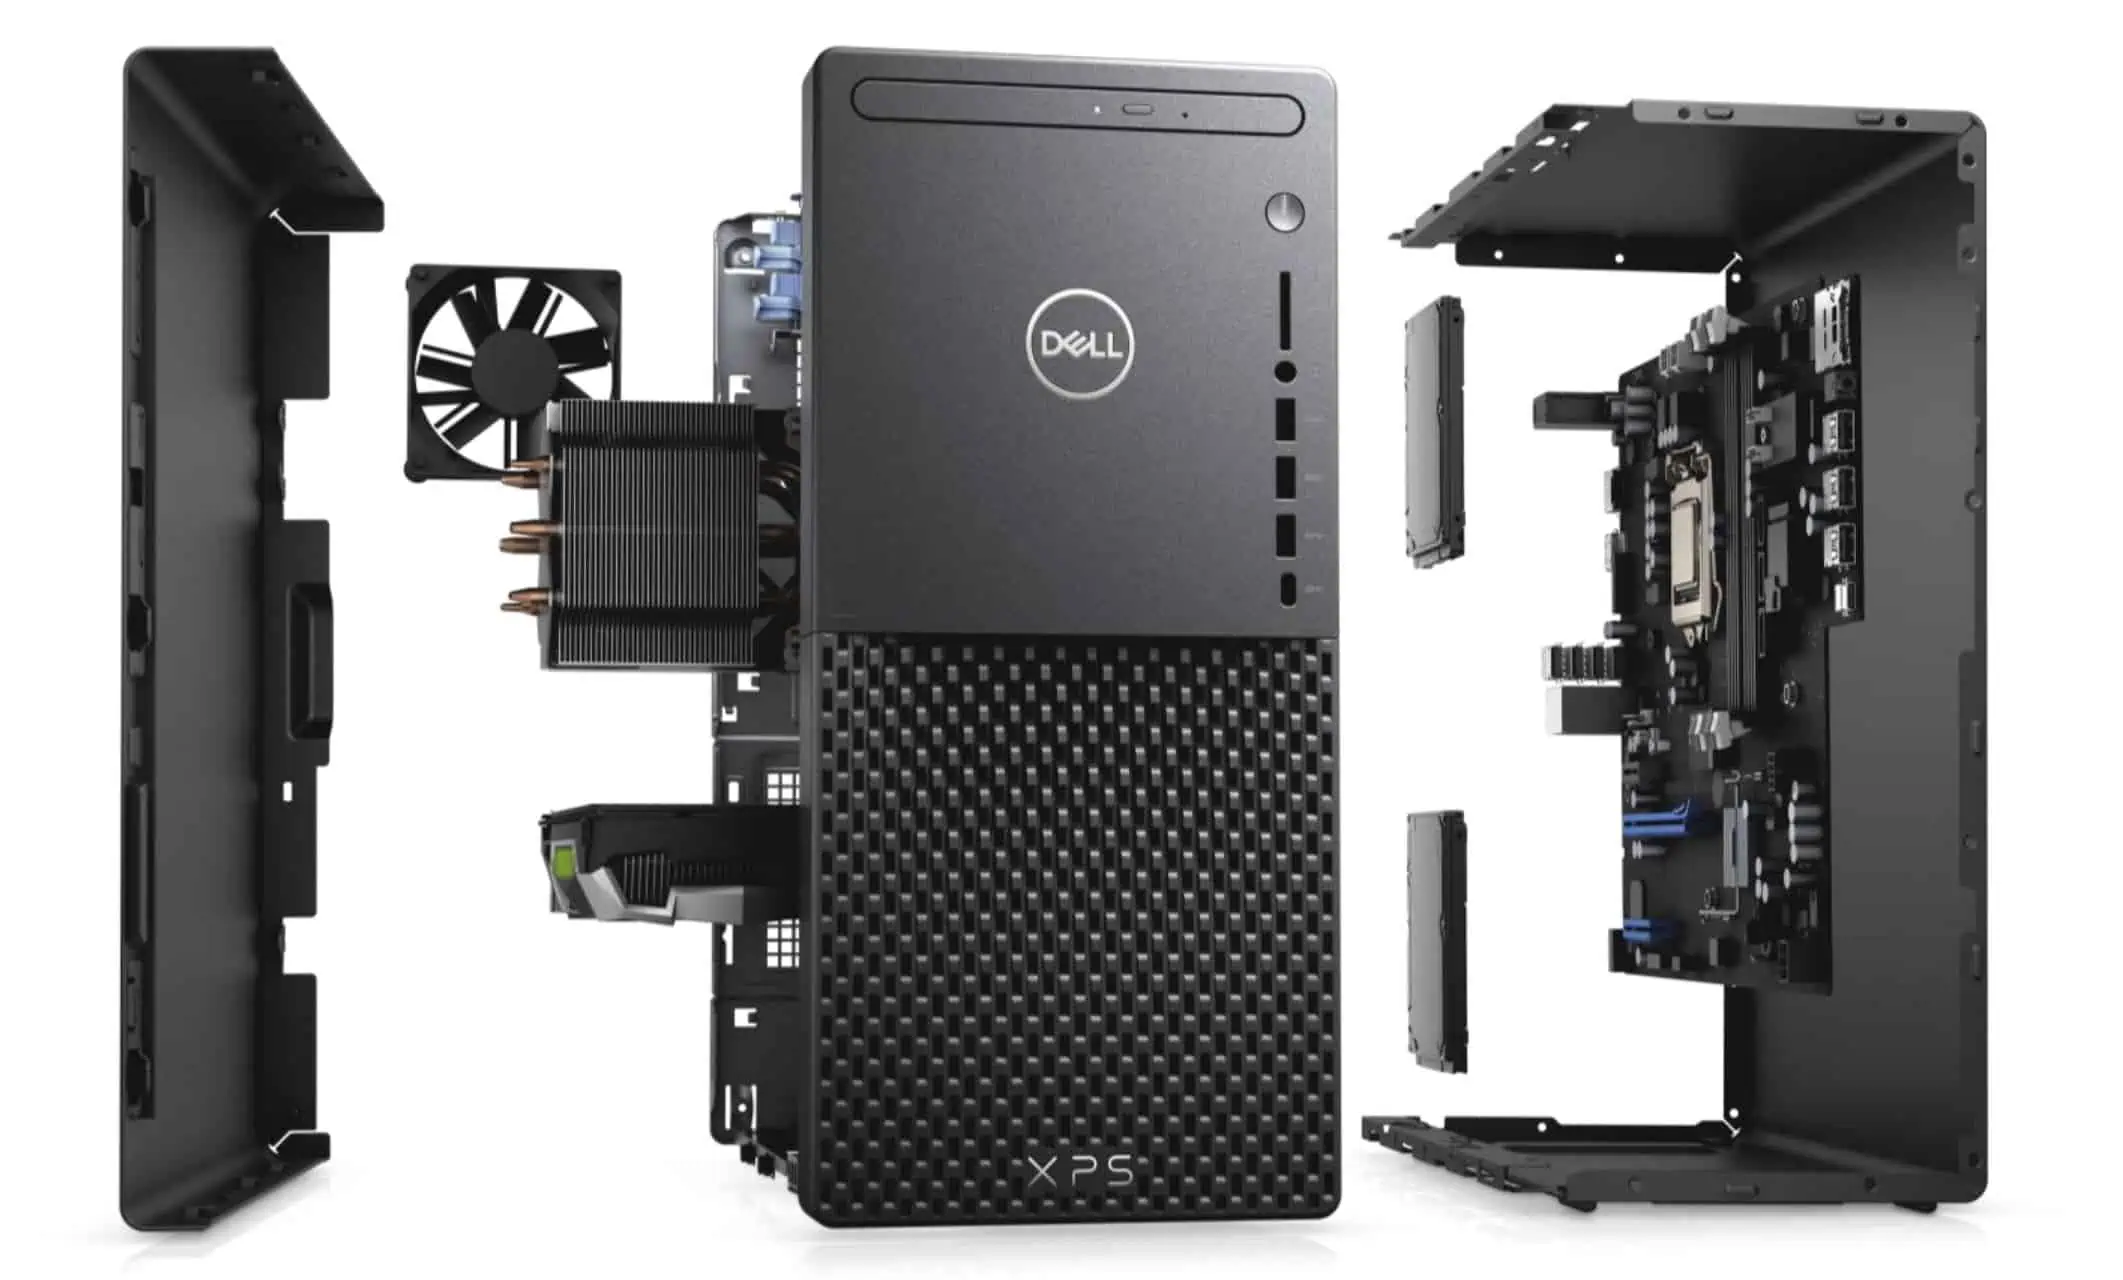 The new Dell XPS Desktop comes with a tool-less chassis and up to a 500W power supply